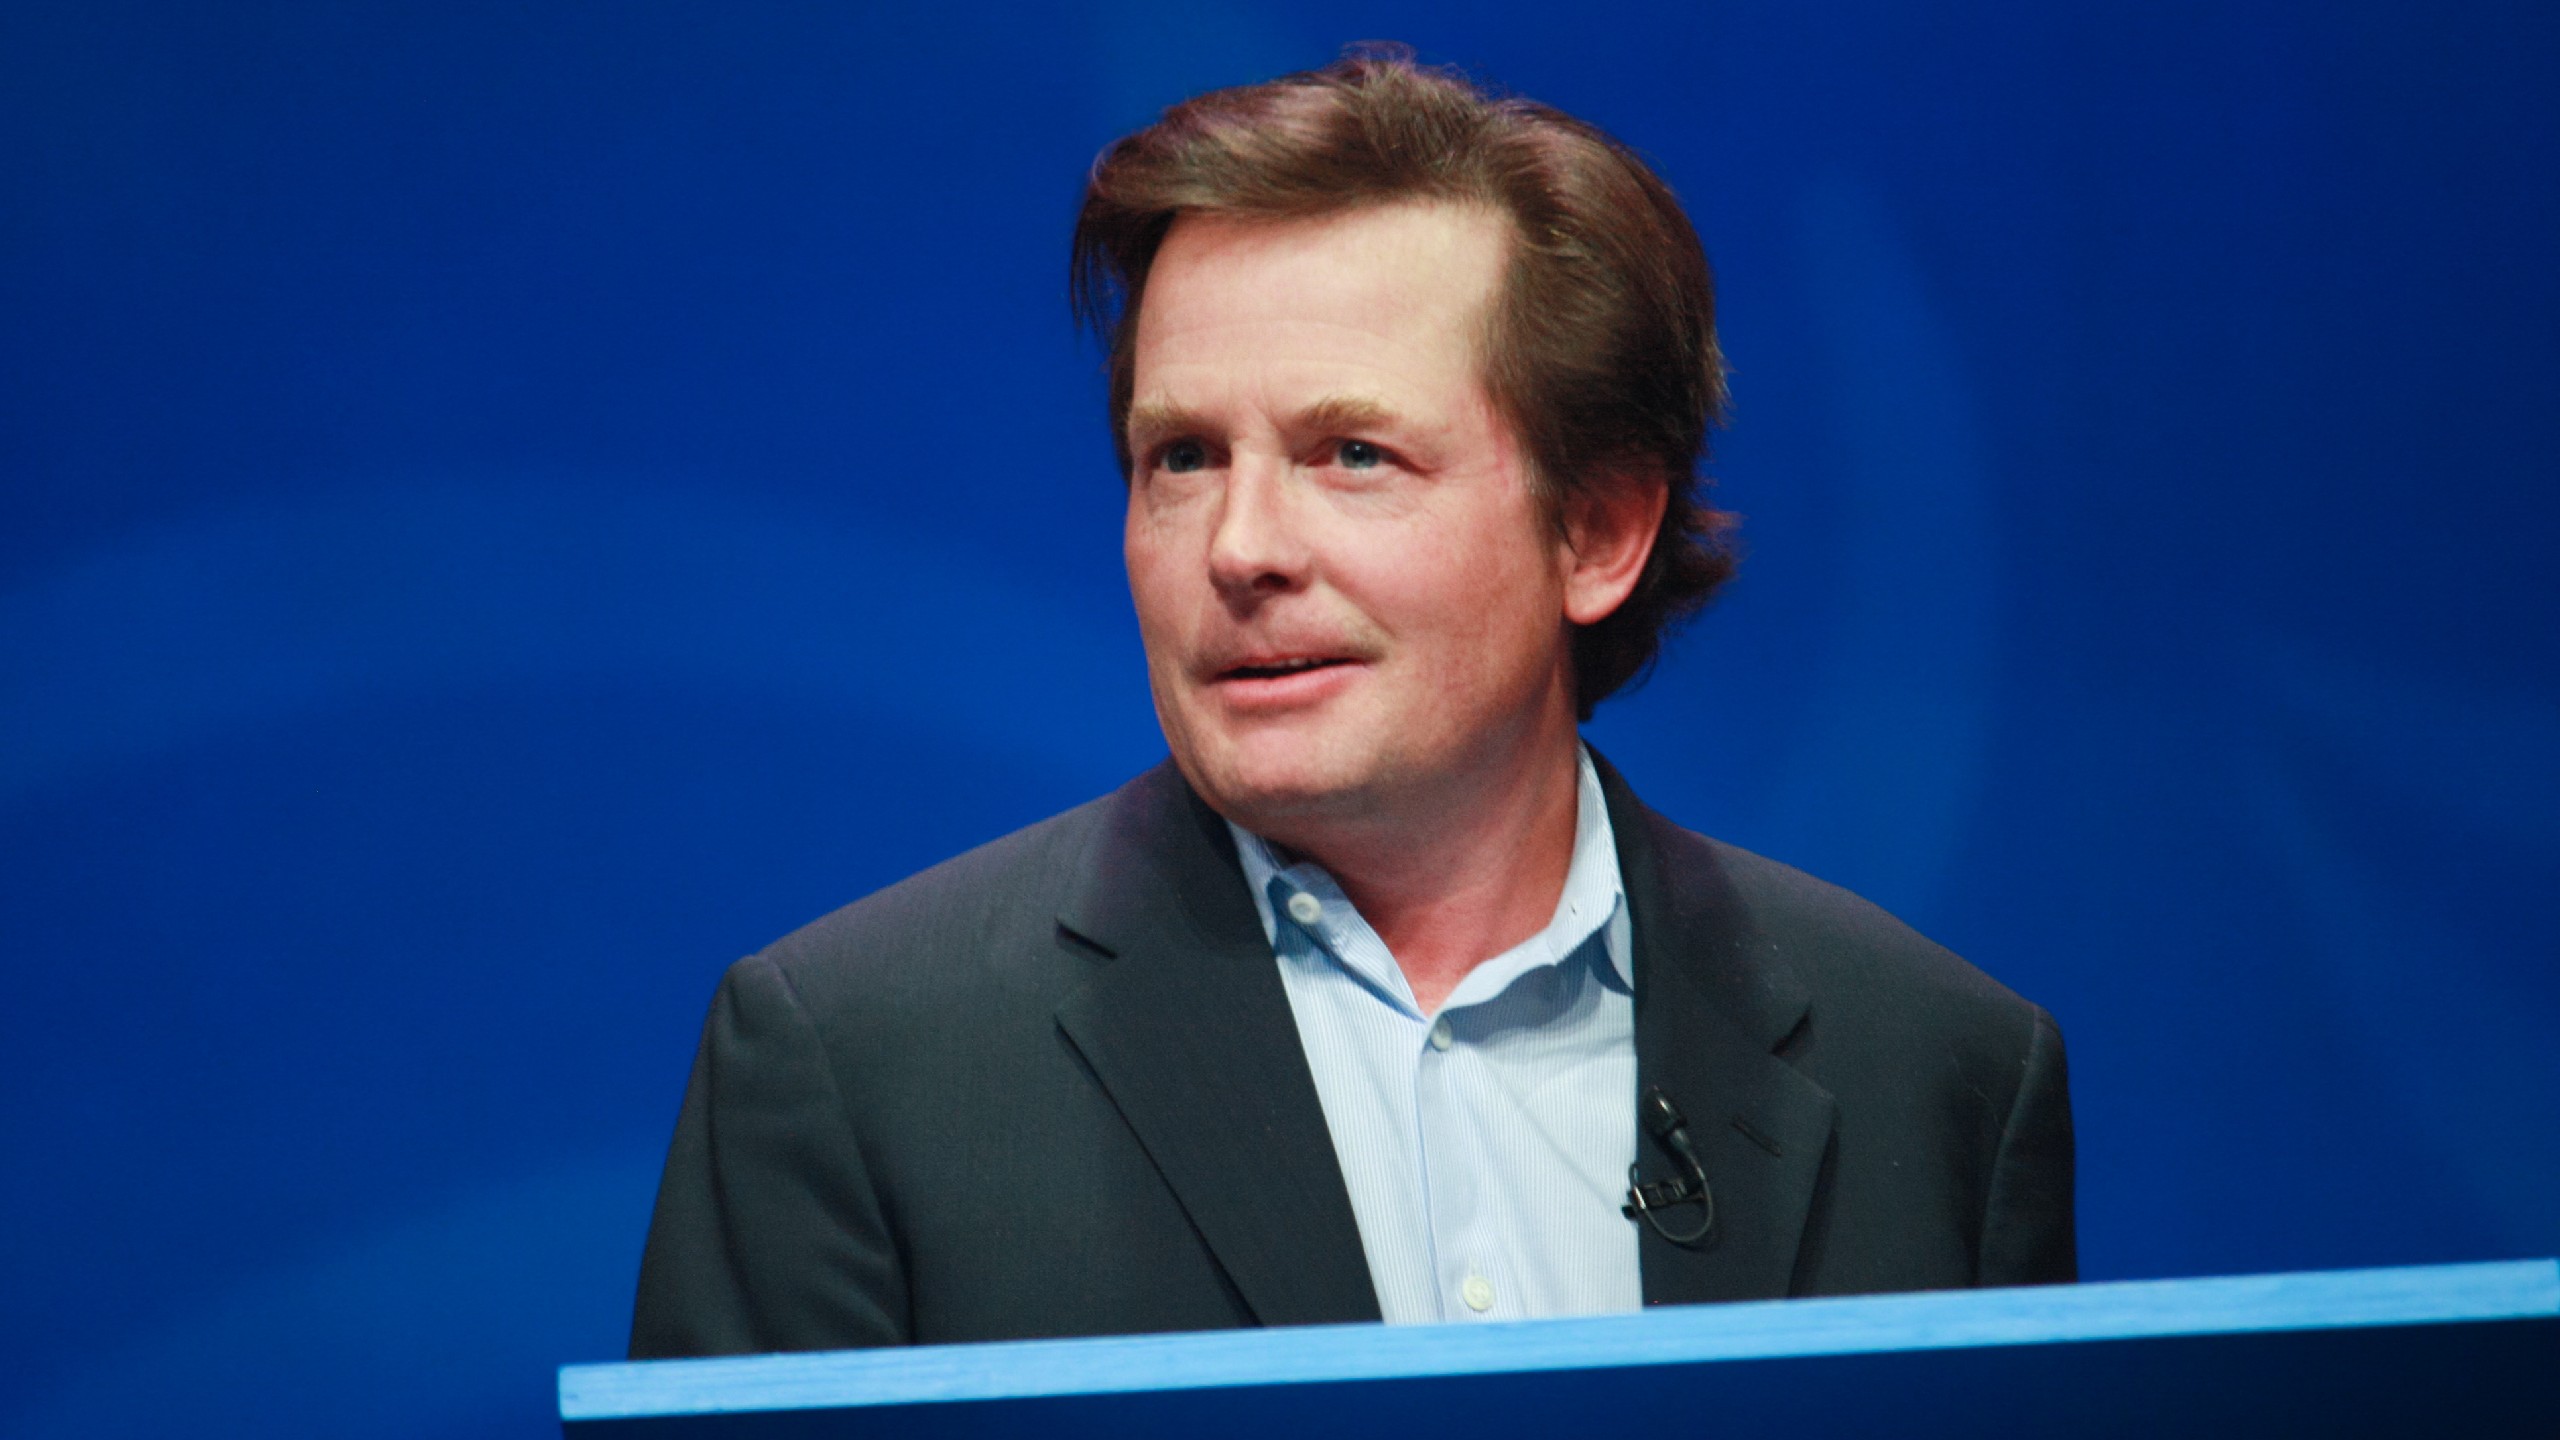 Michael J. Fox will receive an honorary AARP award for his work in Parkinson's advocacy and research